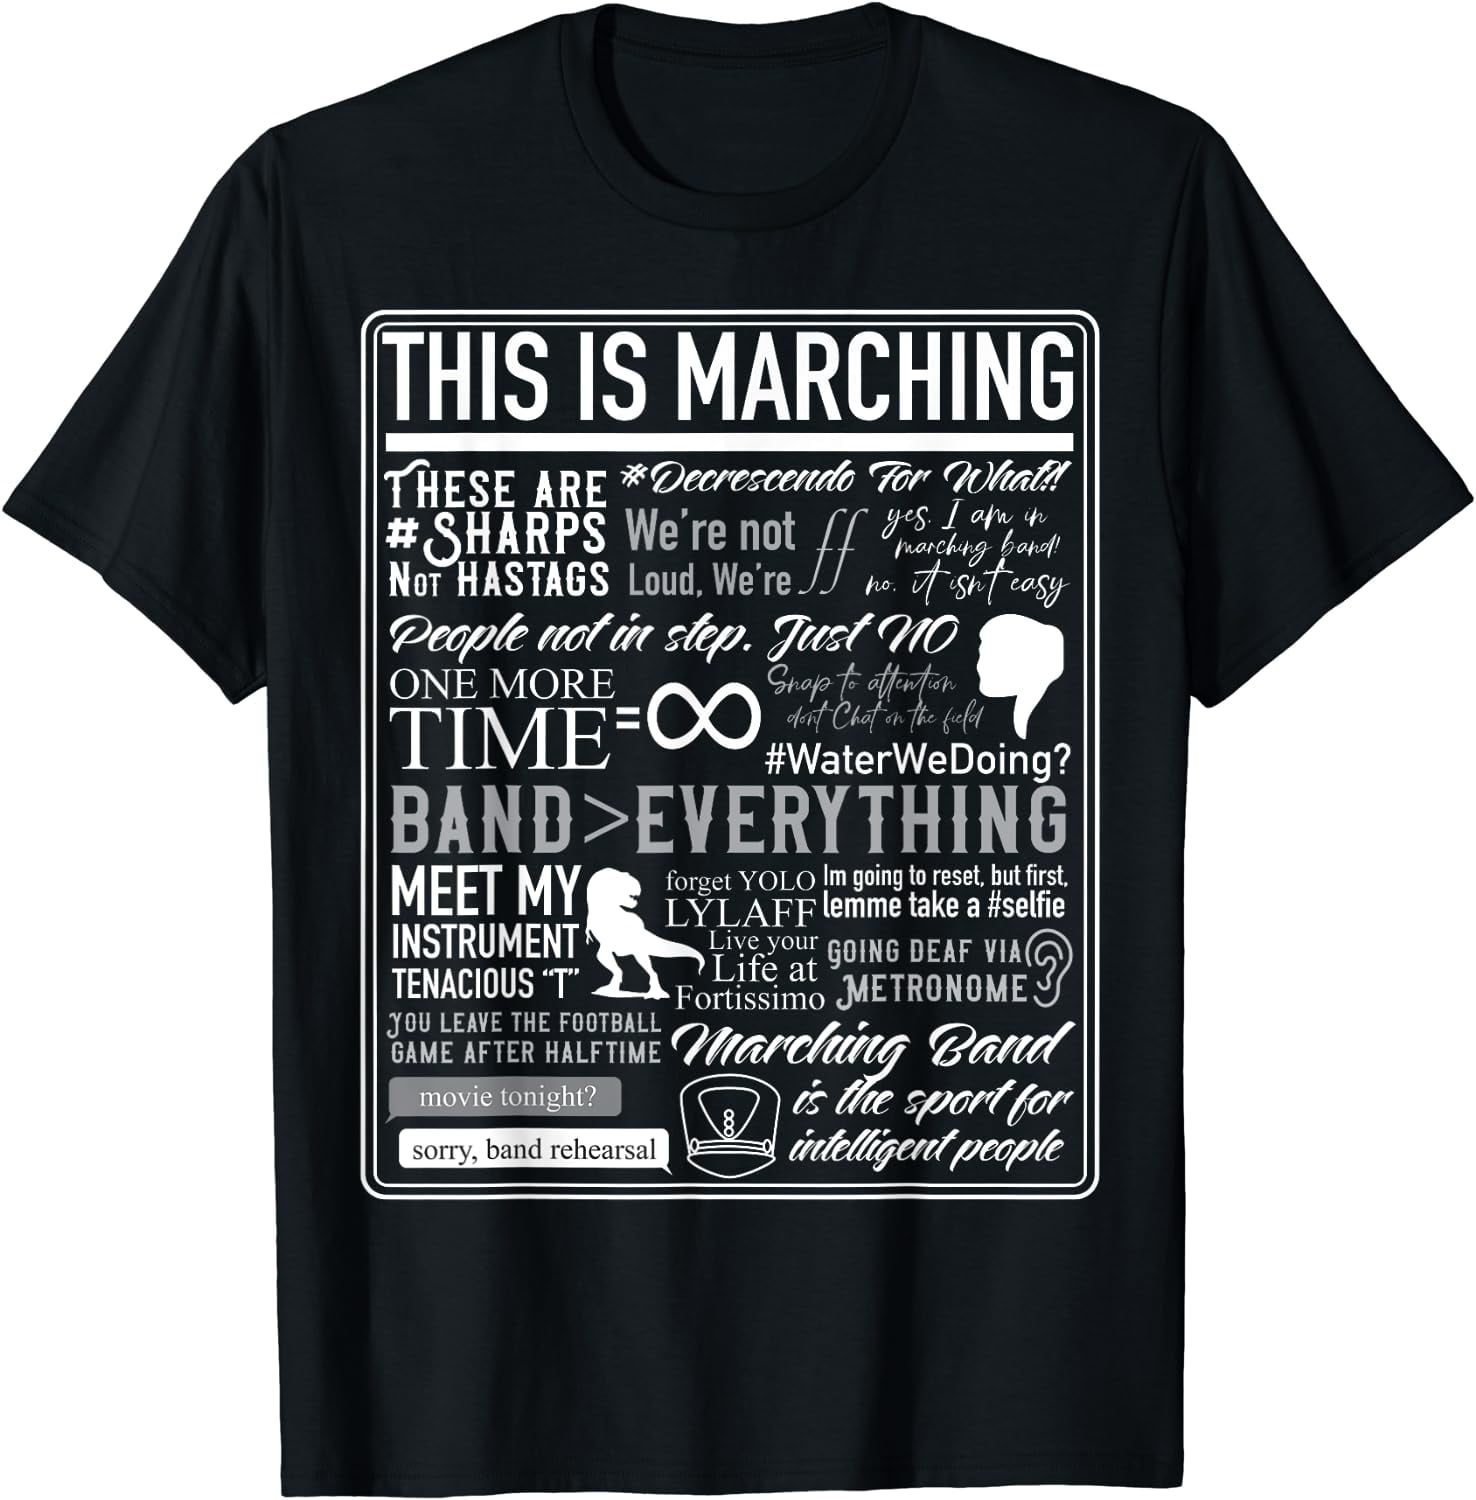 This Is Marching Band - Funny Marching Band Sayings & Memes T-Shirt ...